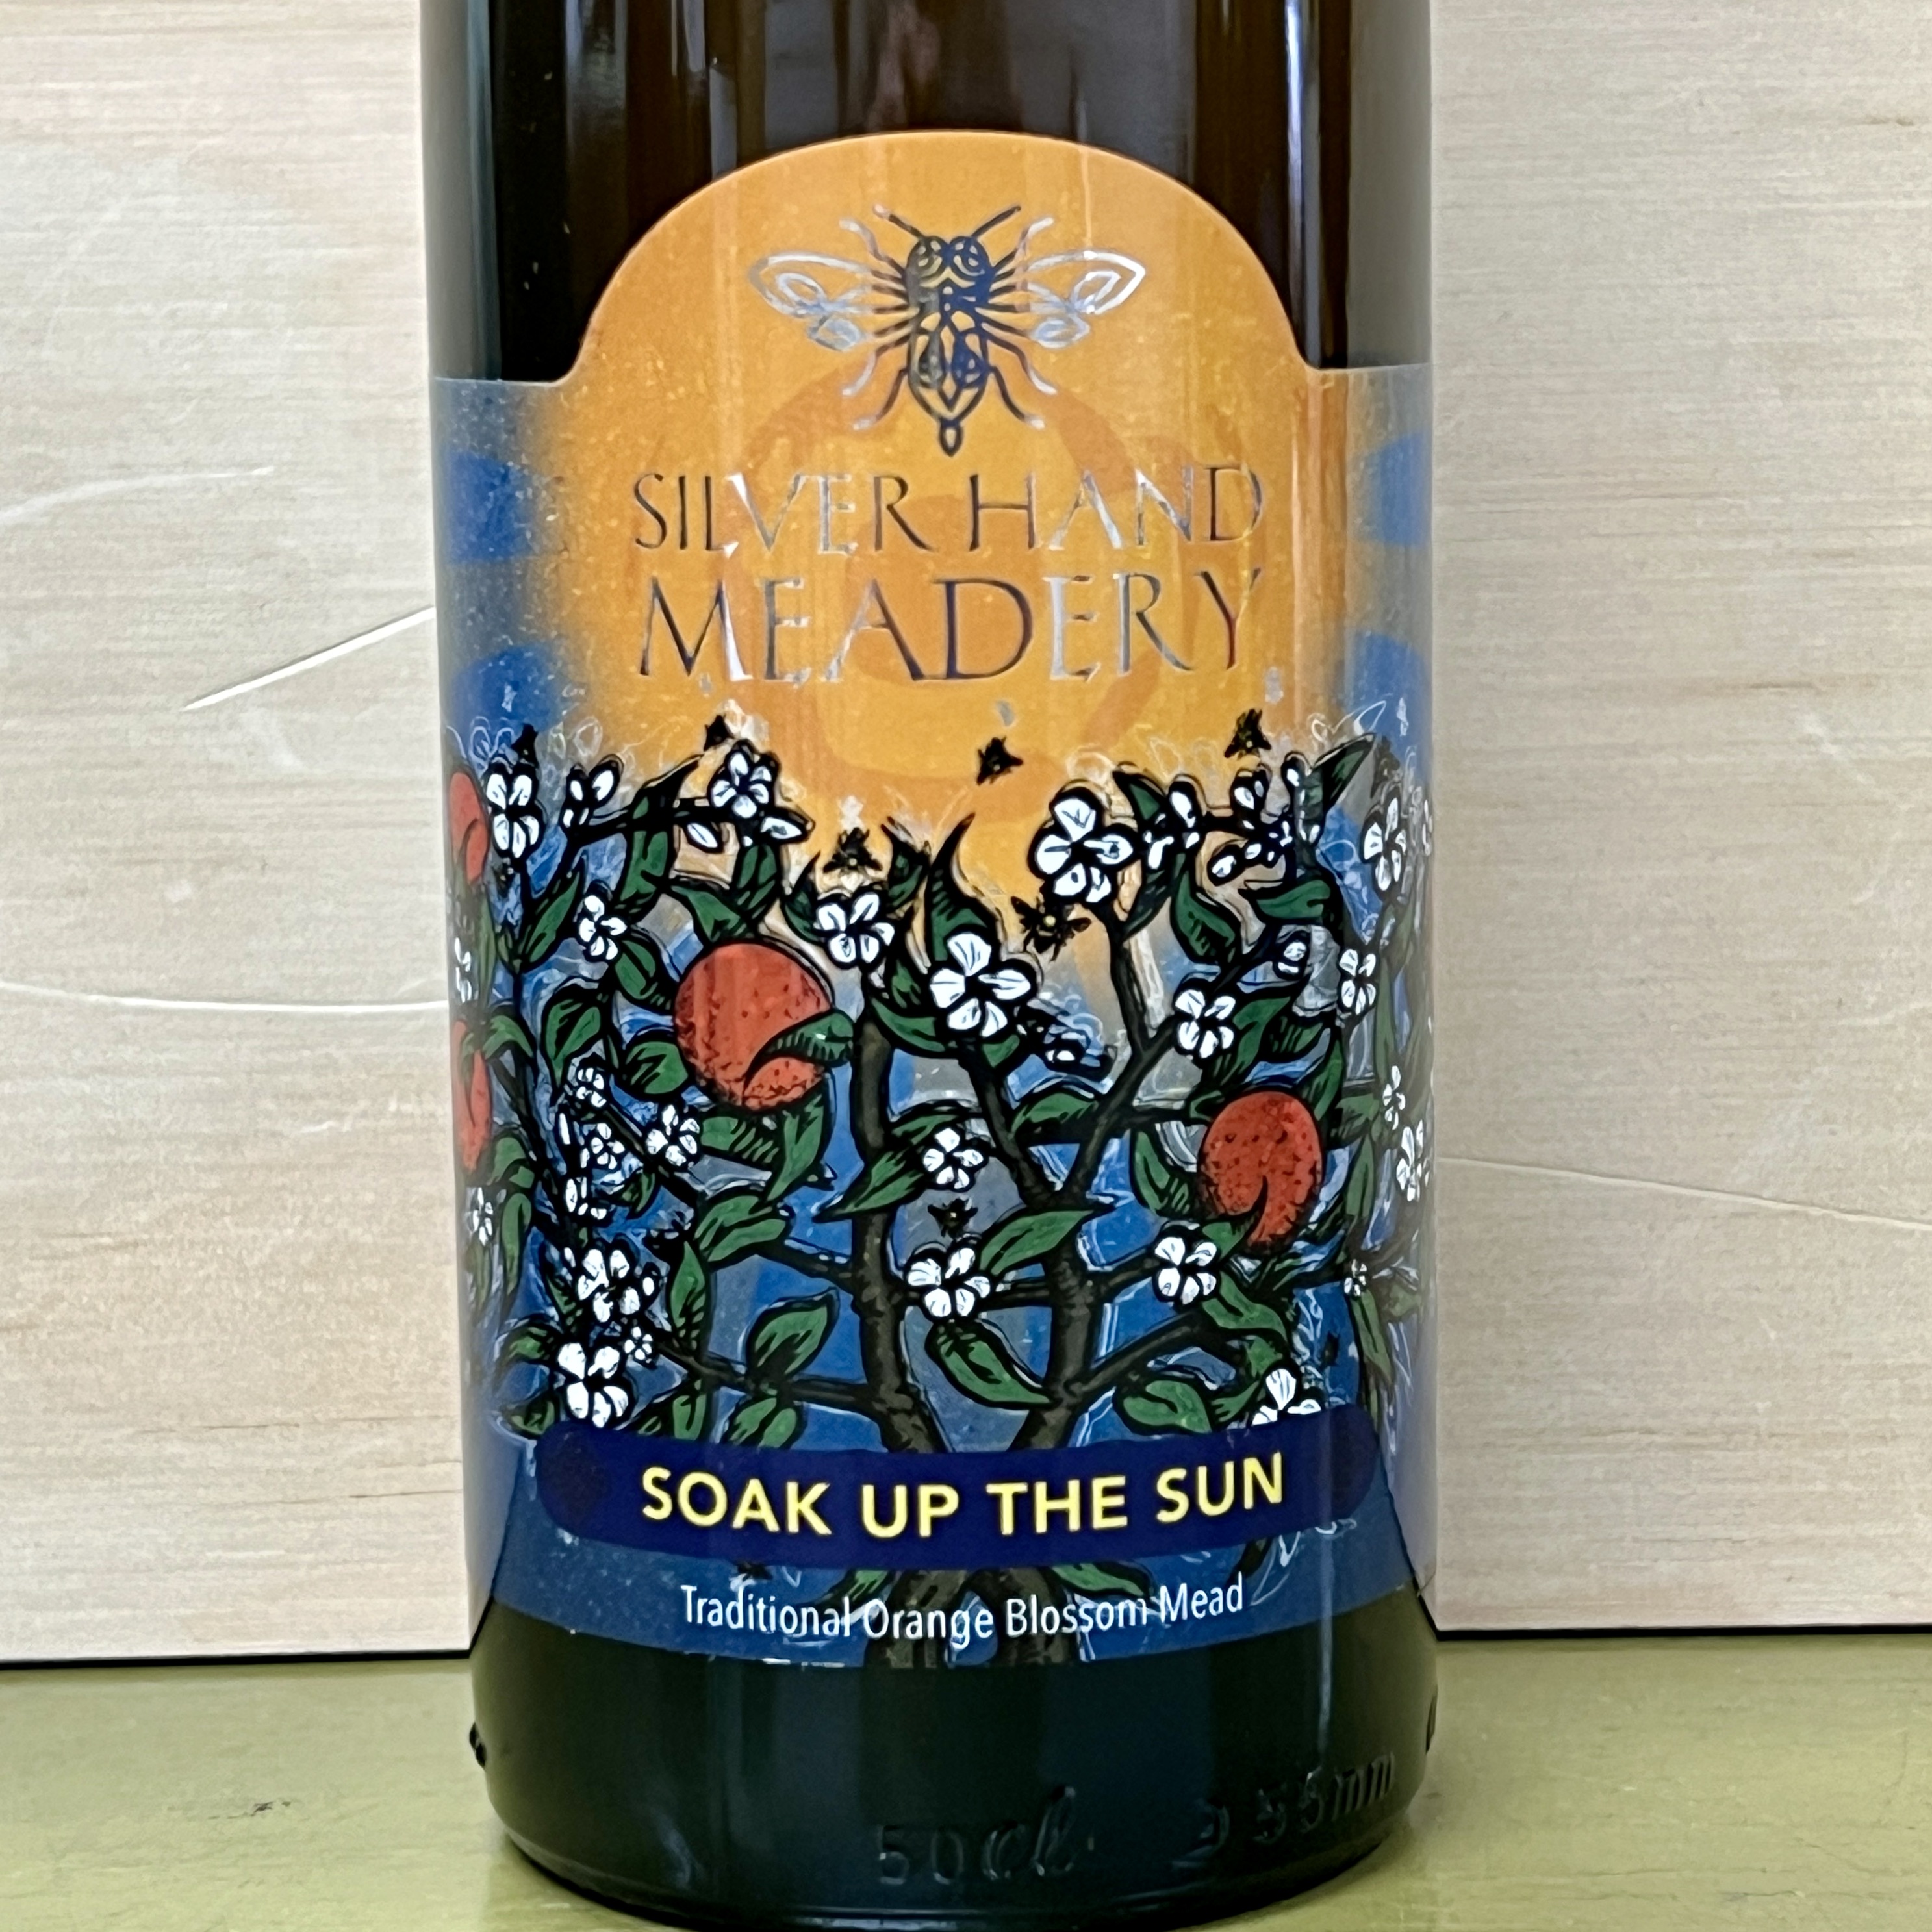 Silver Hand Meadery Soak Up the Sun mead 500 ml